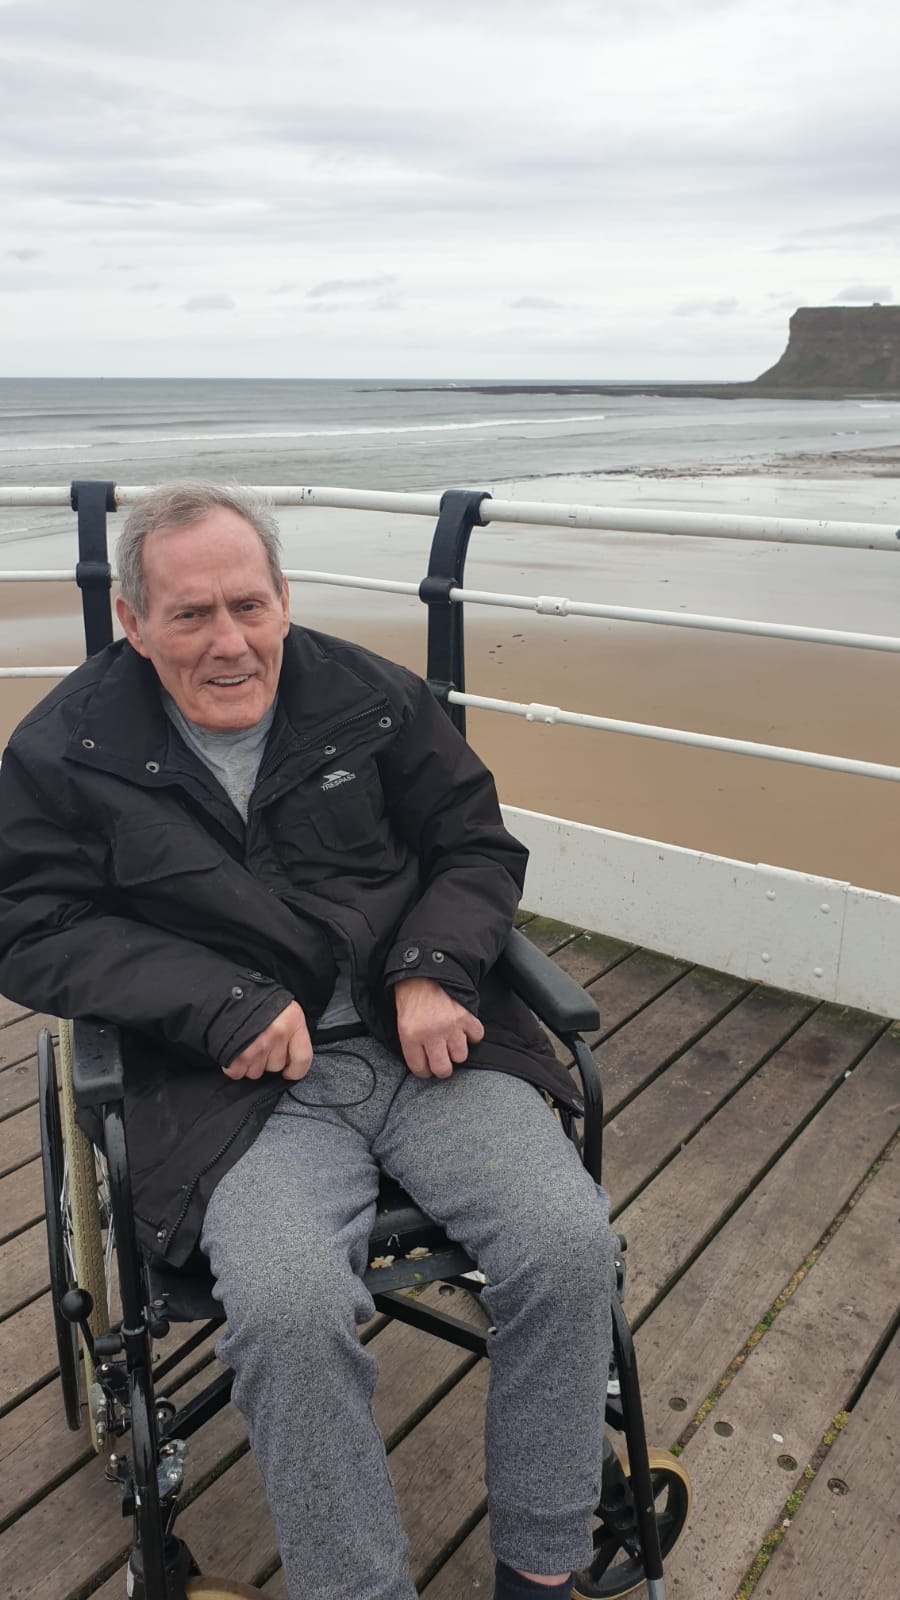 Saltburn Beach September 2019: Key Healthcare is dedicated to caring for elderly residents in safe. We have multiple dementia care homes including our care home middlesbrough, our care home St. Helen and care home saltburn. We excel in monitoring and improving care levels.